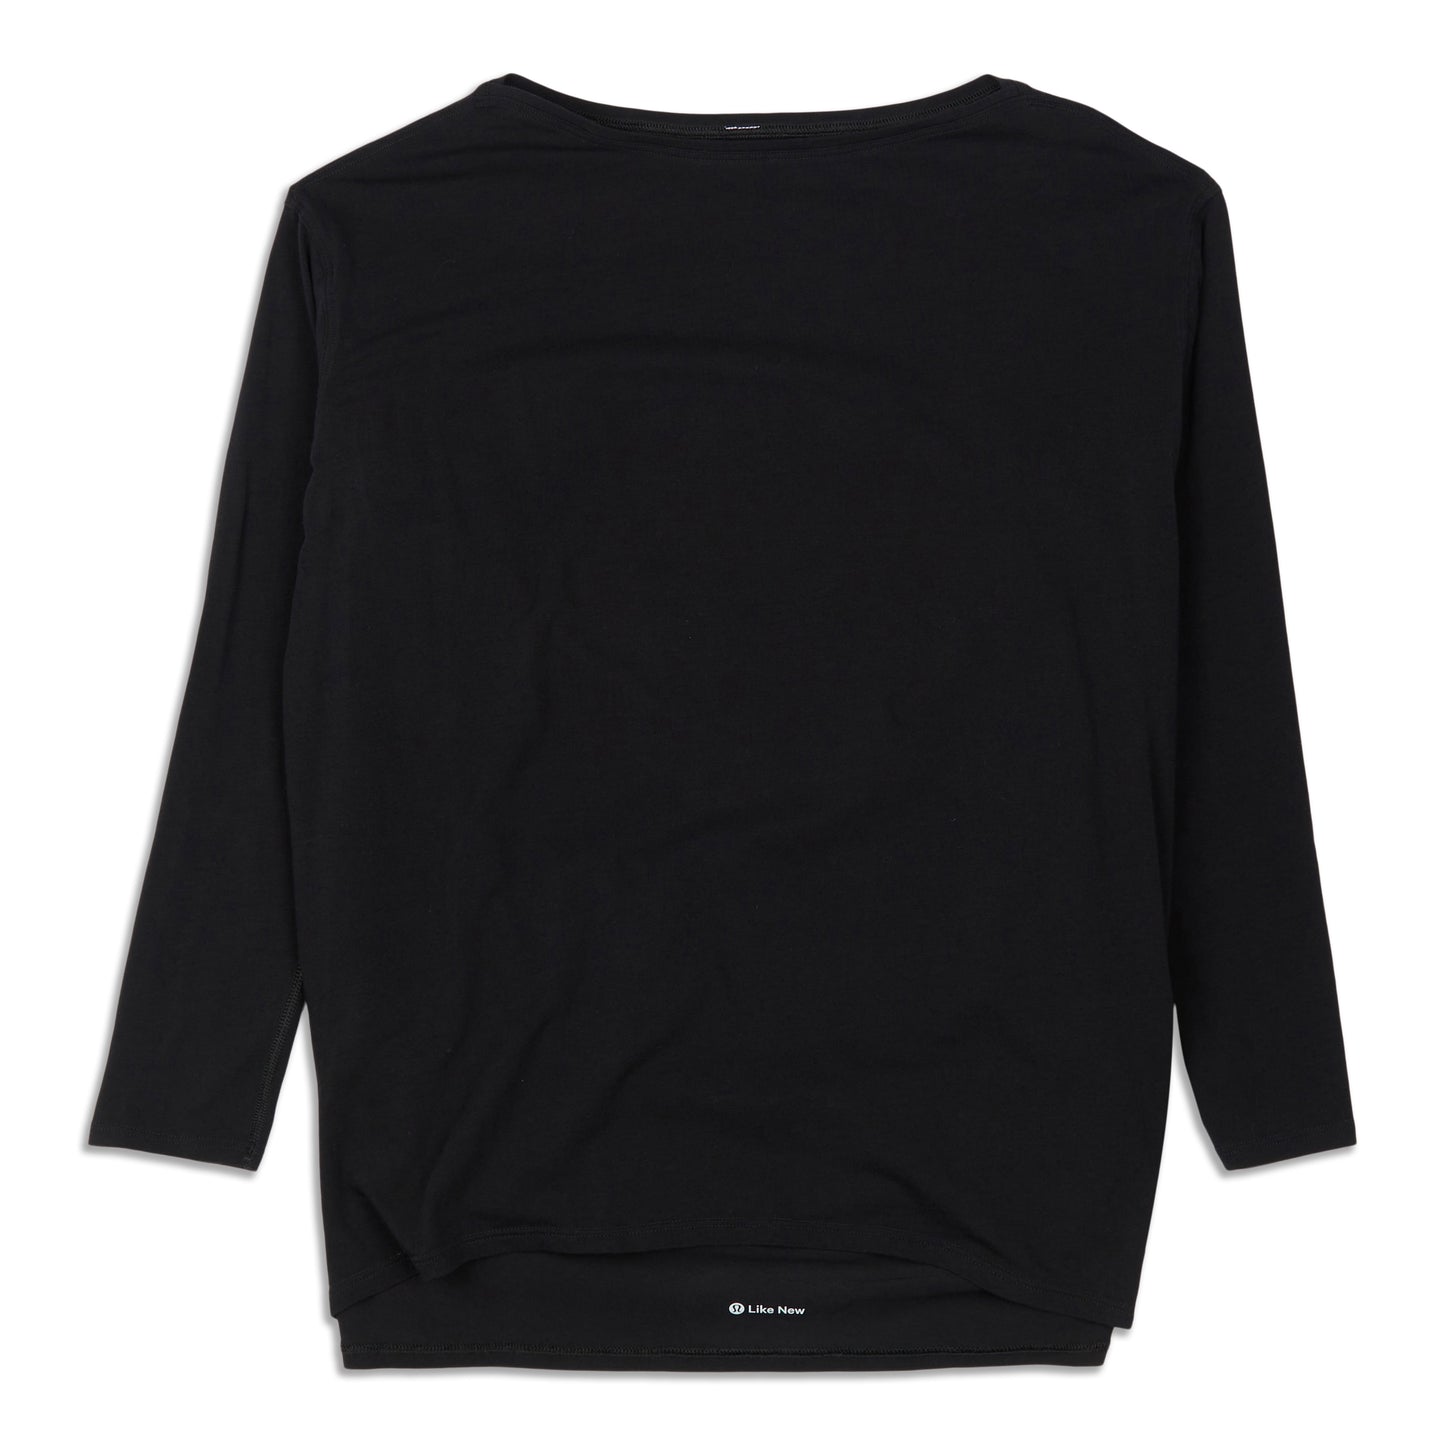 Back In Action Long-Sleeve Shirt - Resale